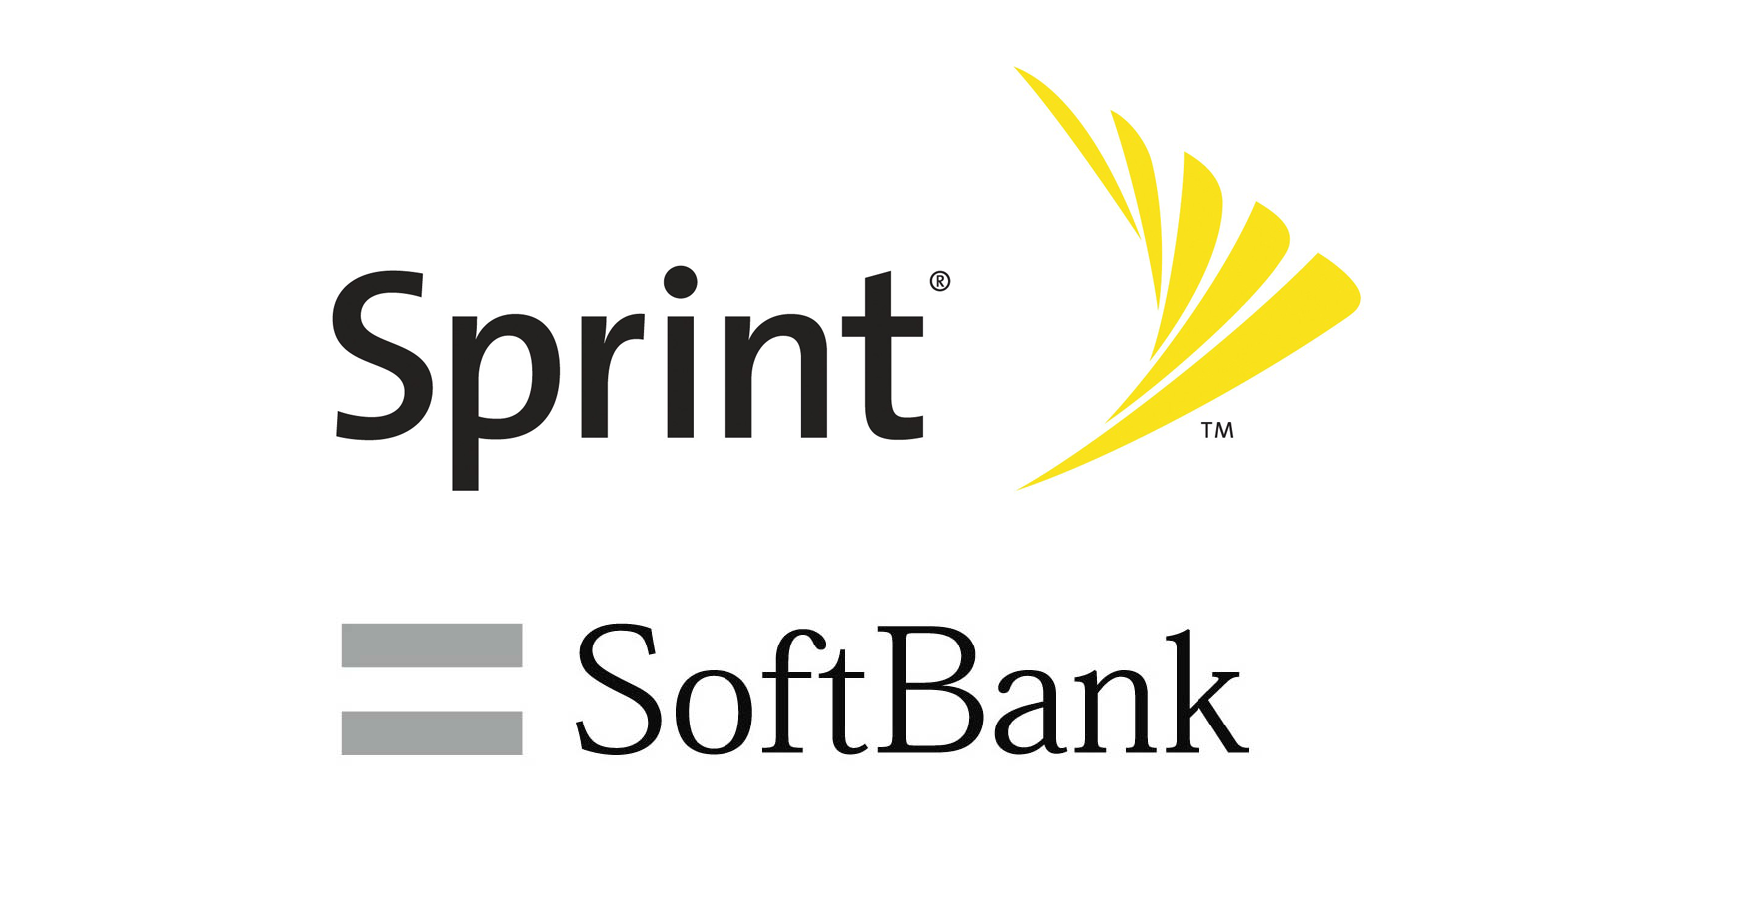 Why Softbank buying Sprint is a big deal